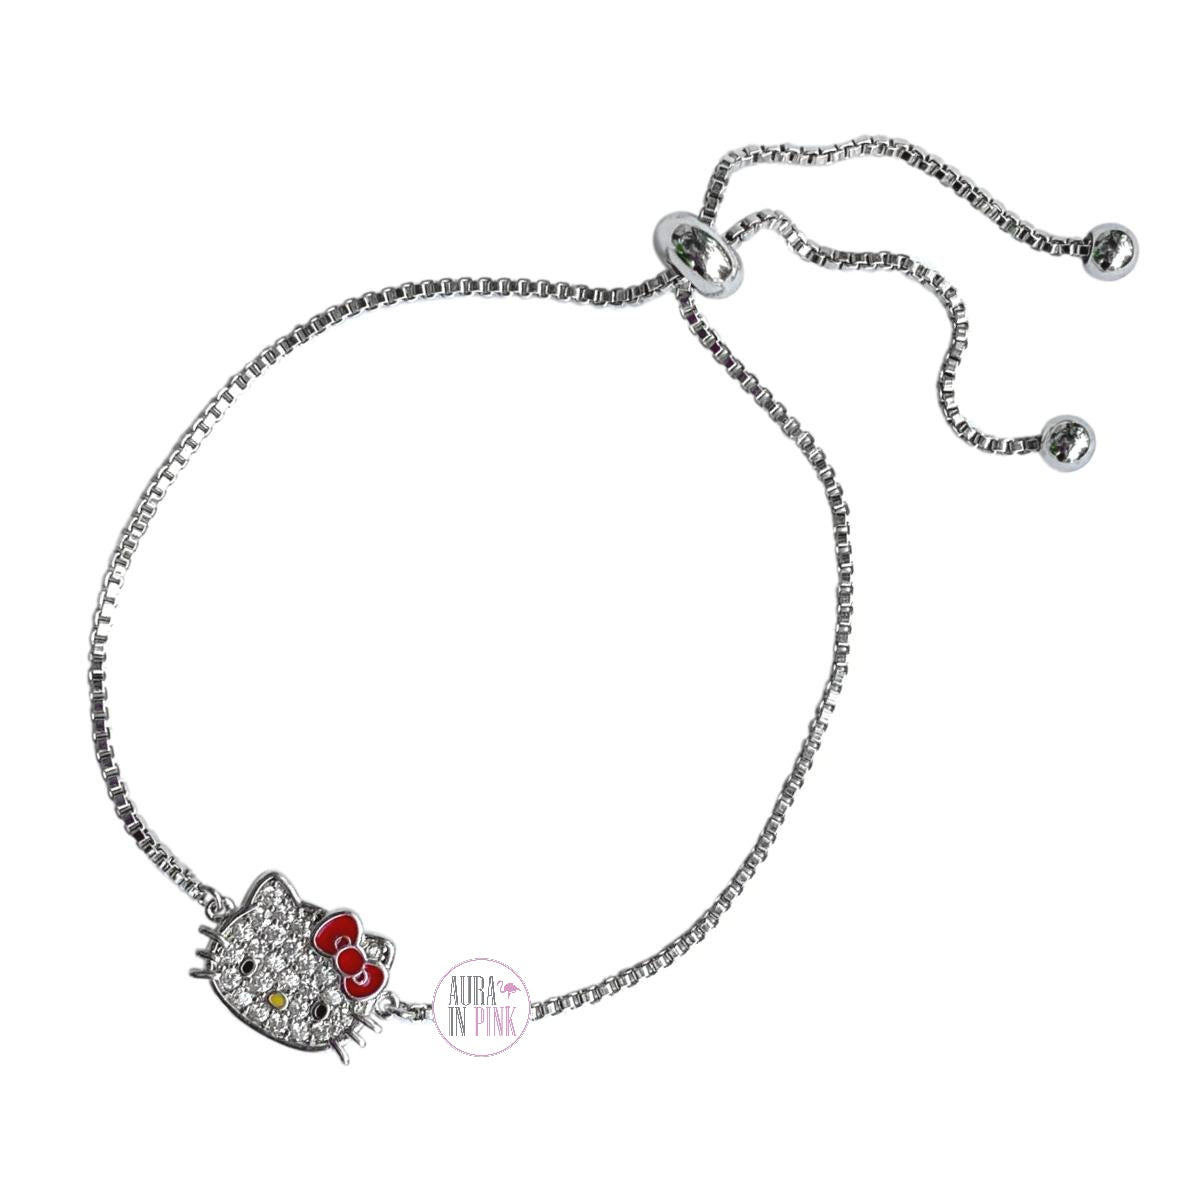 Sanrio Hello Kitty And Friends Charm Bracelet Cinnamoroll, Pompompurin, My  Melody, Keroppi, Authentic Officially Licensed : Target